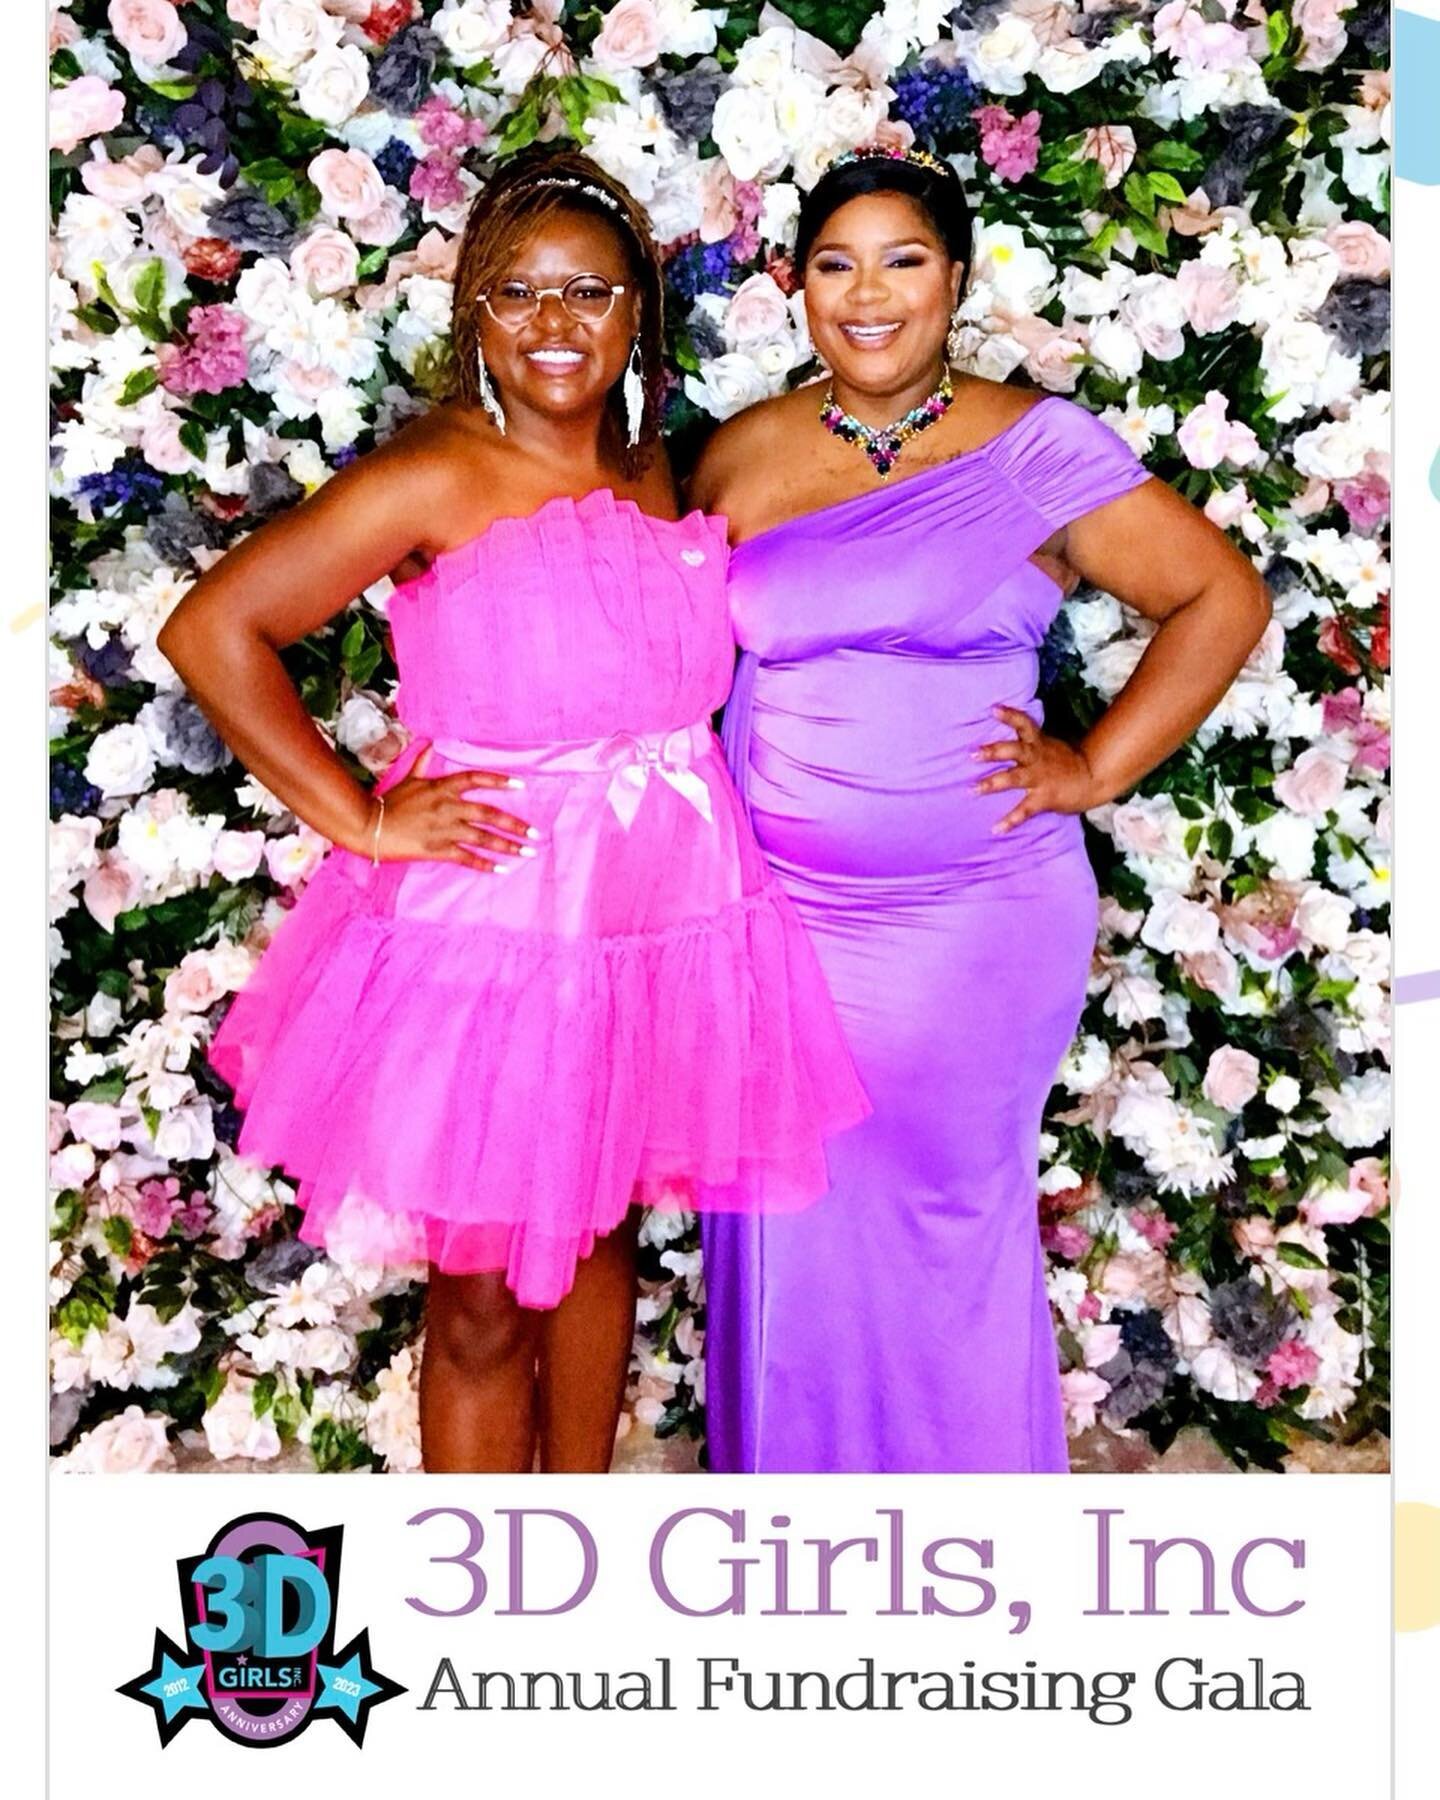 @3dgirlsinc annual fundraiser is almost at their $10K goal! Become a monthly donor to support prenatal, S.T.E.A.M, empowerment and community events 🌹 So exciting to see @officialbrittanyburns &amp; baby boy sharing the award stage! 💗